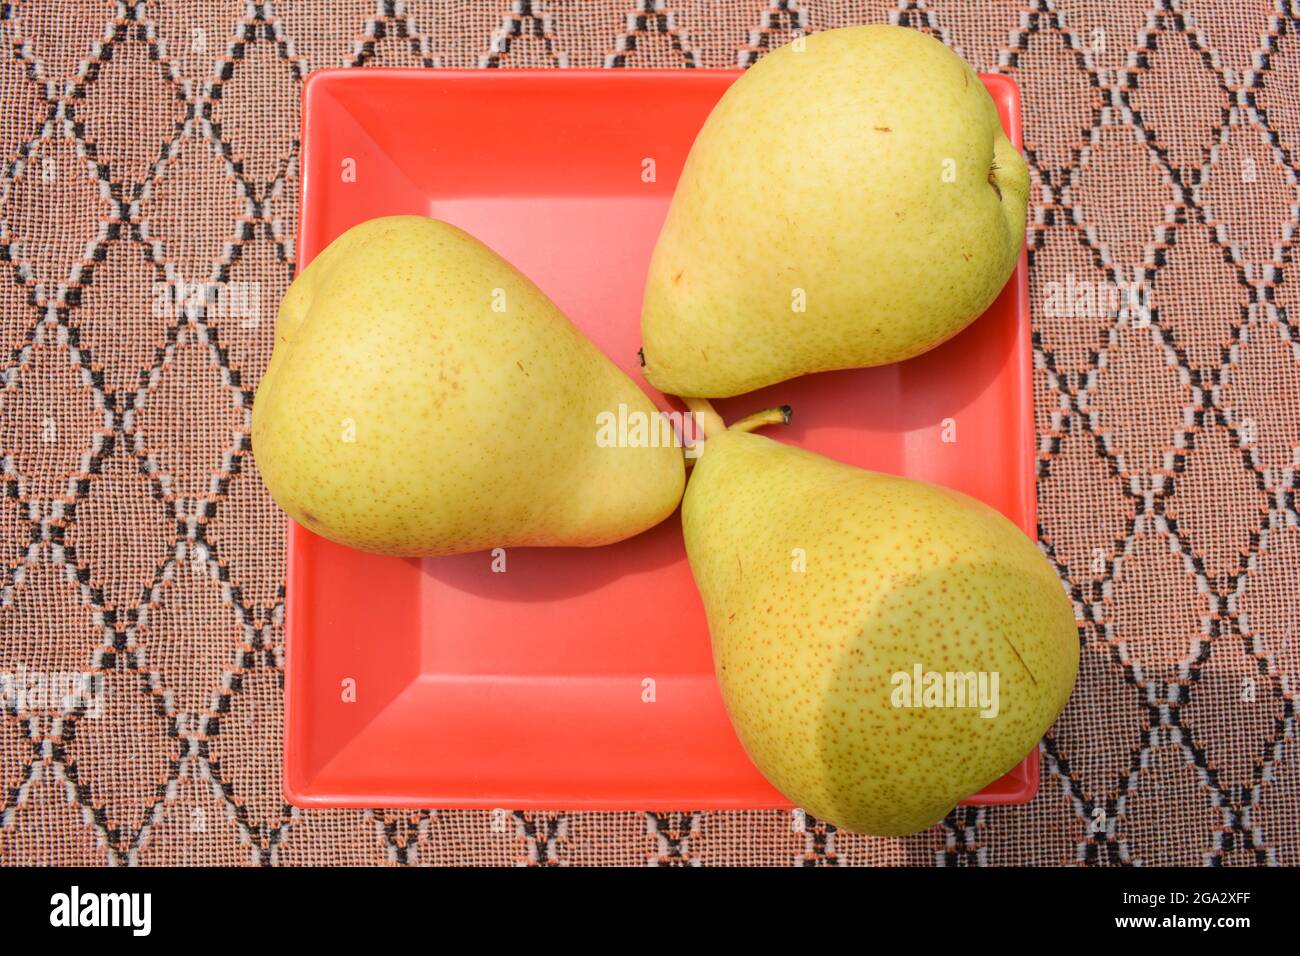 Top view of Pear fruits on red plate background. Sweet soft delicious fruits Stock Photo